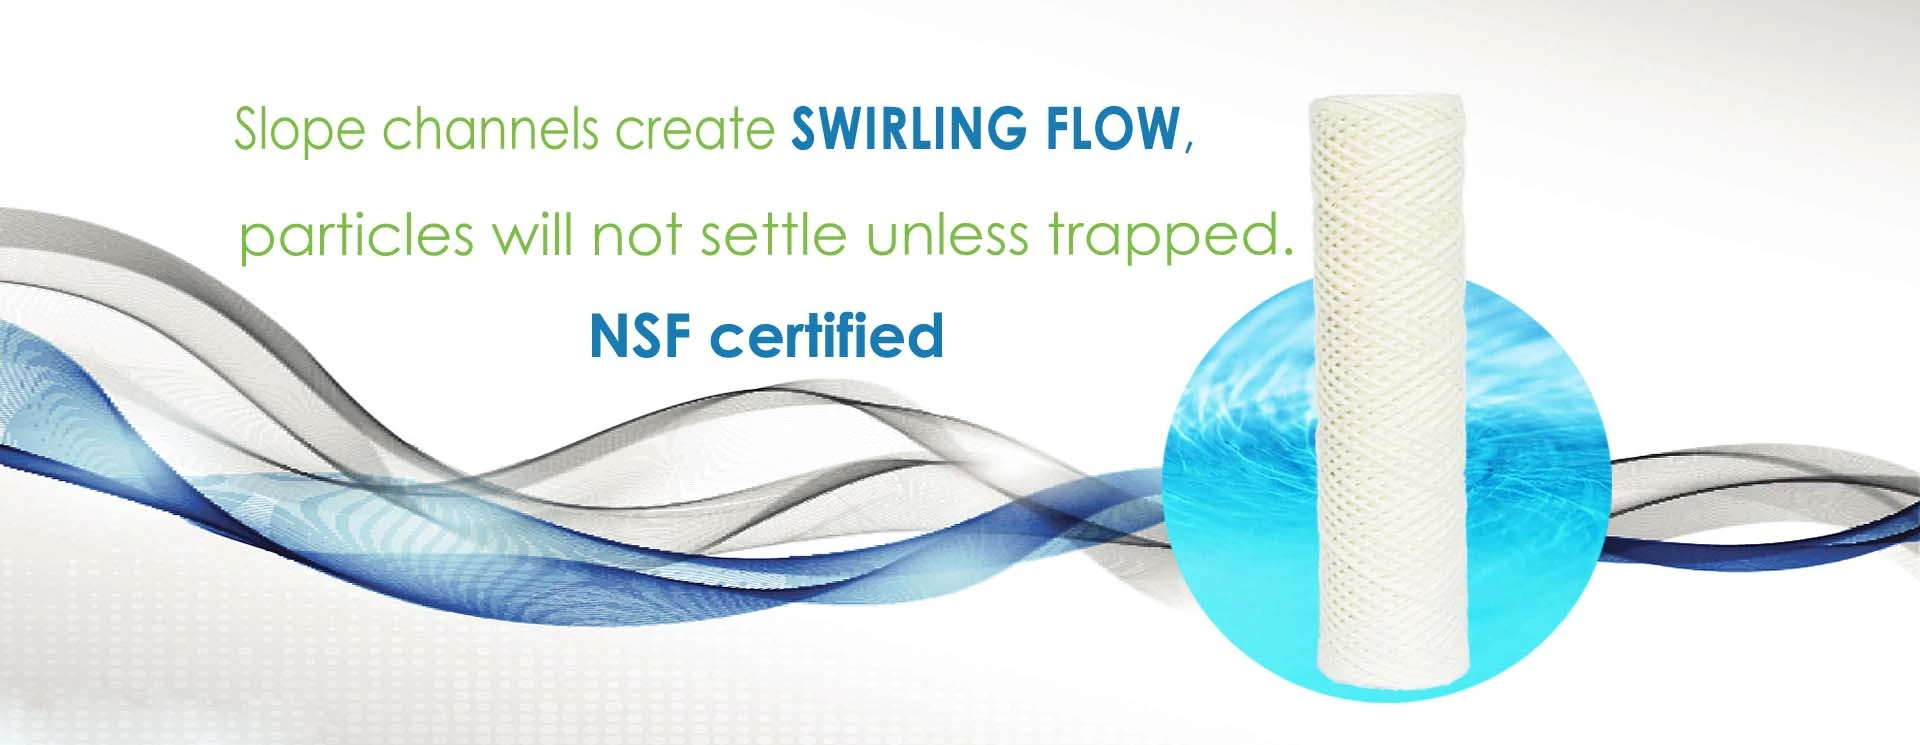 Swirling flow string wound filters